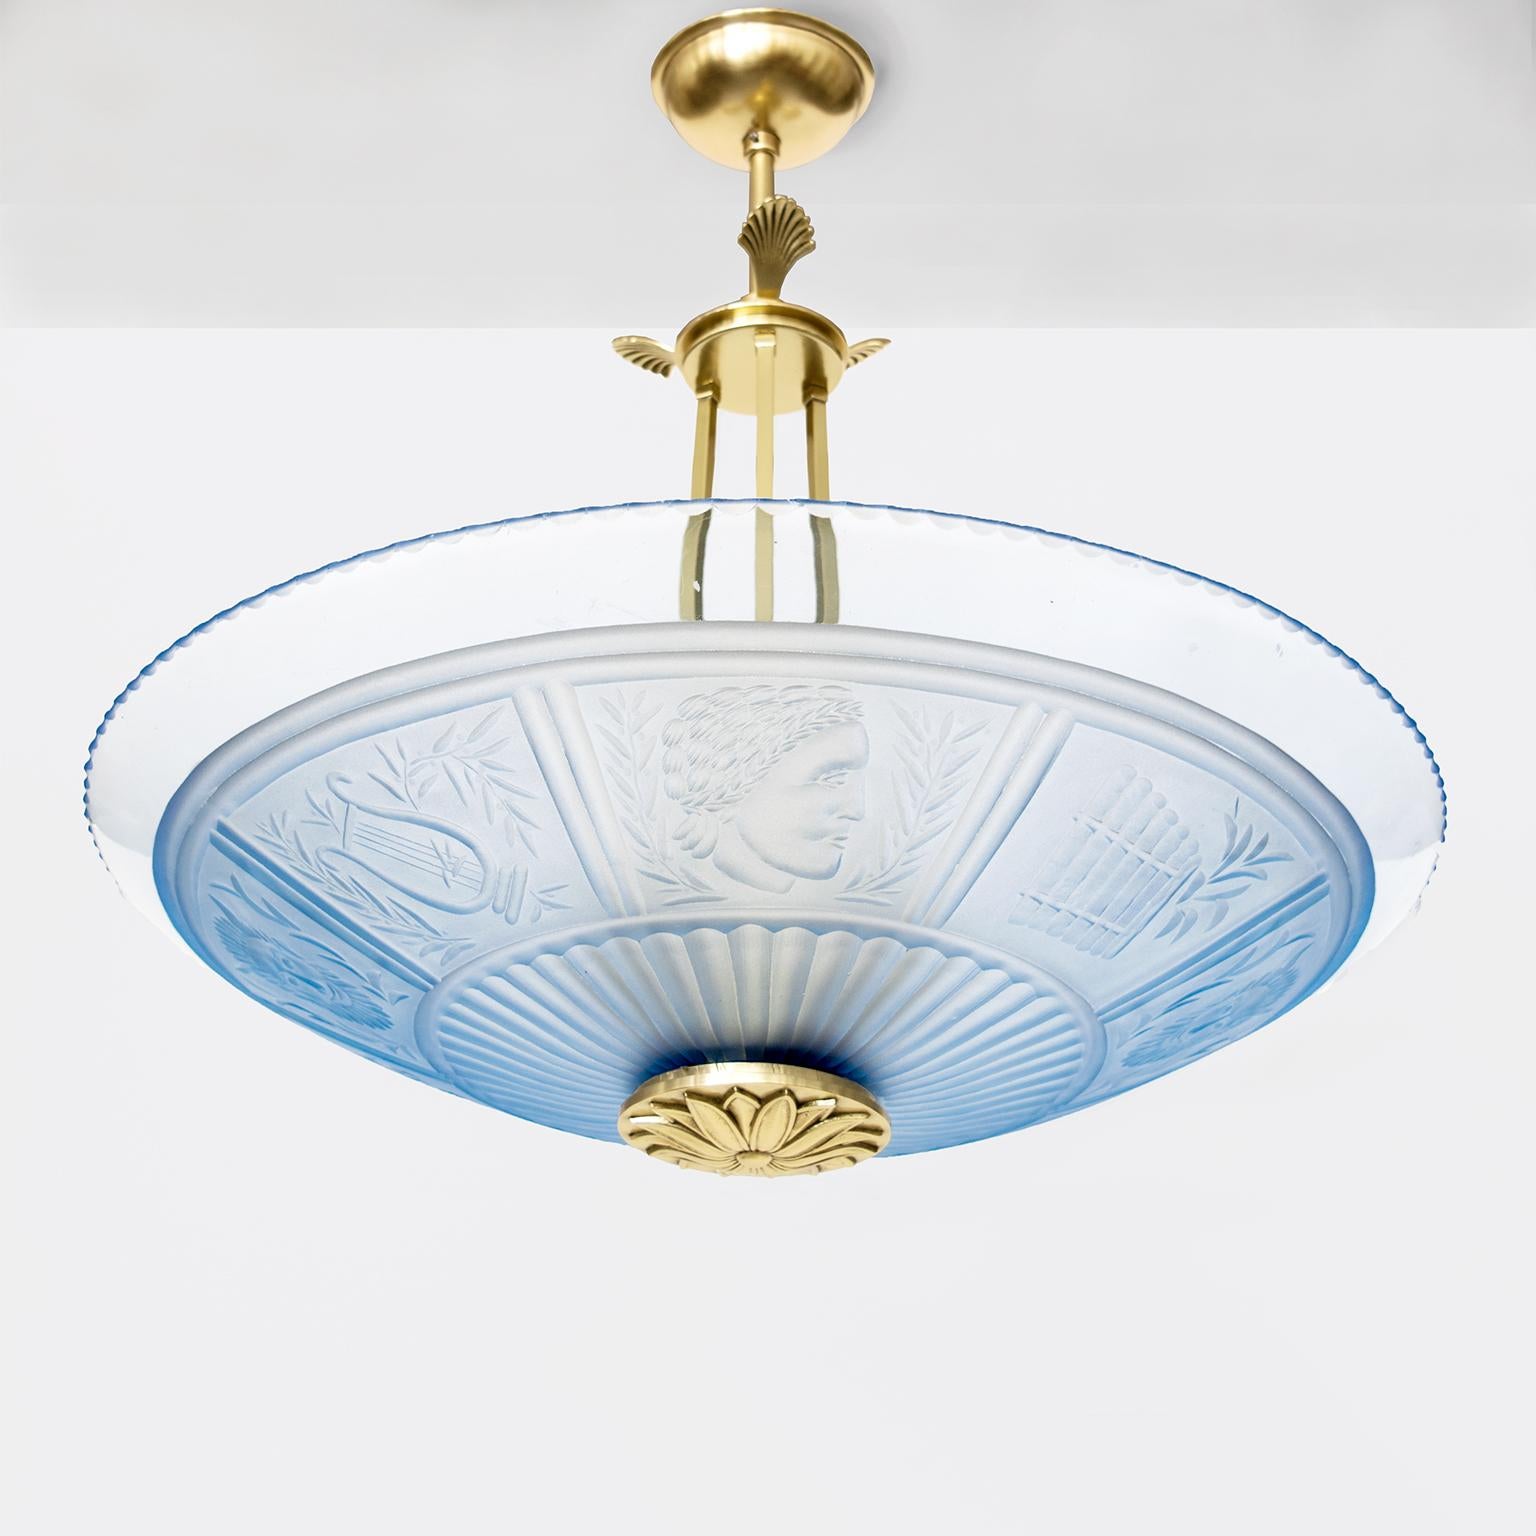 Scandinavian Modern pendant with a pale blue clear hand and acid etched glass shade which is decorated with Apollo’s head, a Pan's flute and lyre. An elegant hanging system, canopy and rosette finial are all newly polished and lacquered brass. The